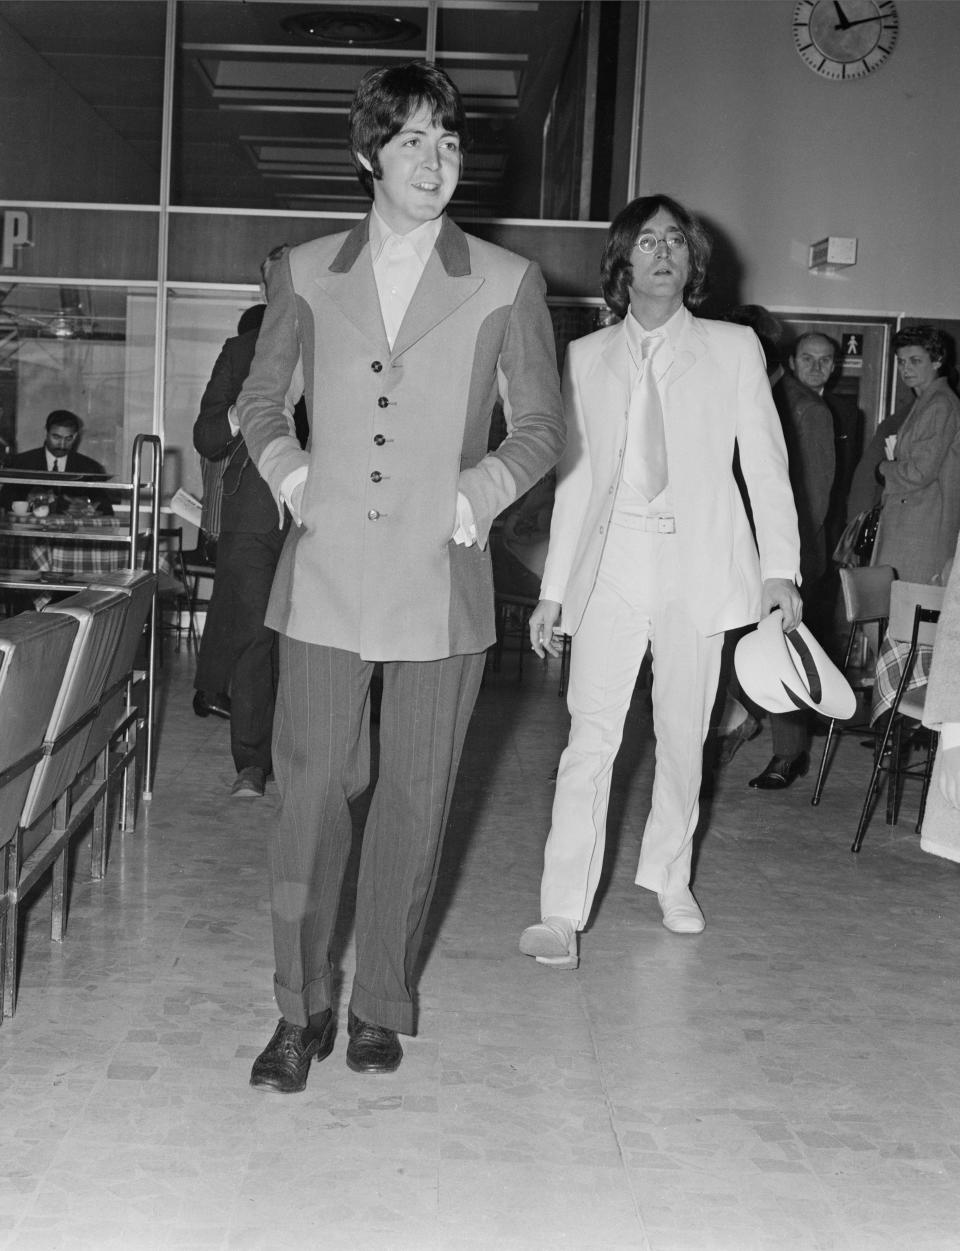 British musicians of the Beatles, Paul McCartney and John Lennon (1940 - 1980) at Heathrow Airport, London, UK, 12th May 1968. (Photo by Dove/Daily Express/Getty Images)